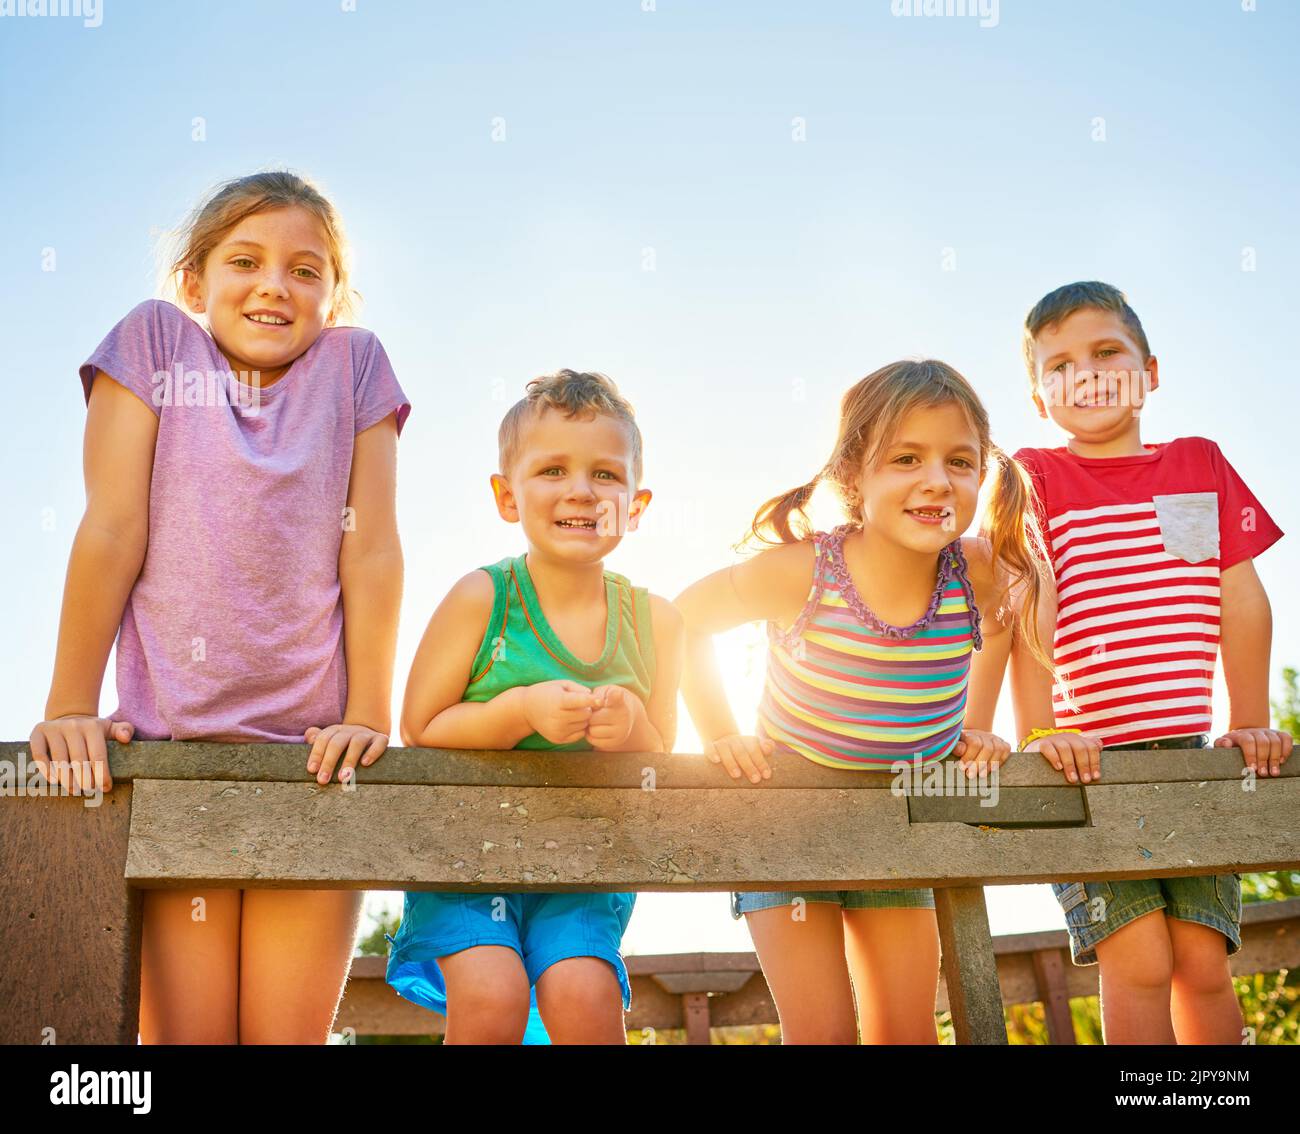 Having a bunch of fun in the summer sun. Portrait of a group of little children playing together outdoors. Stock Photo